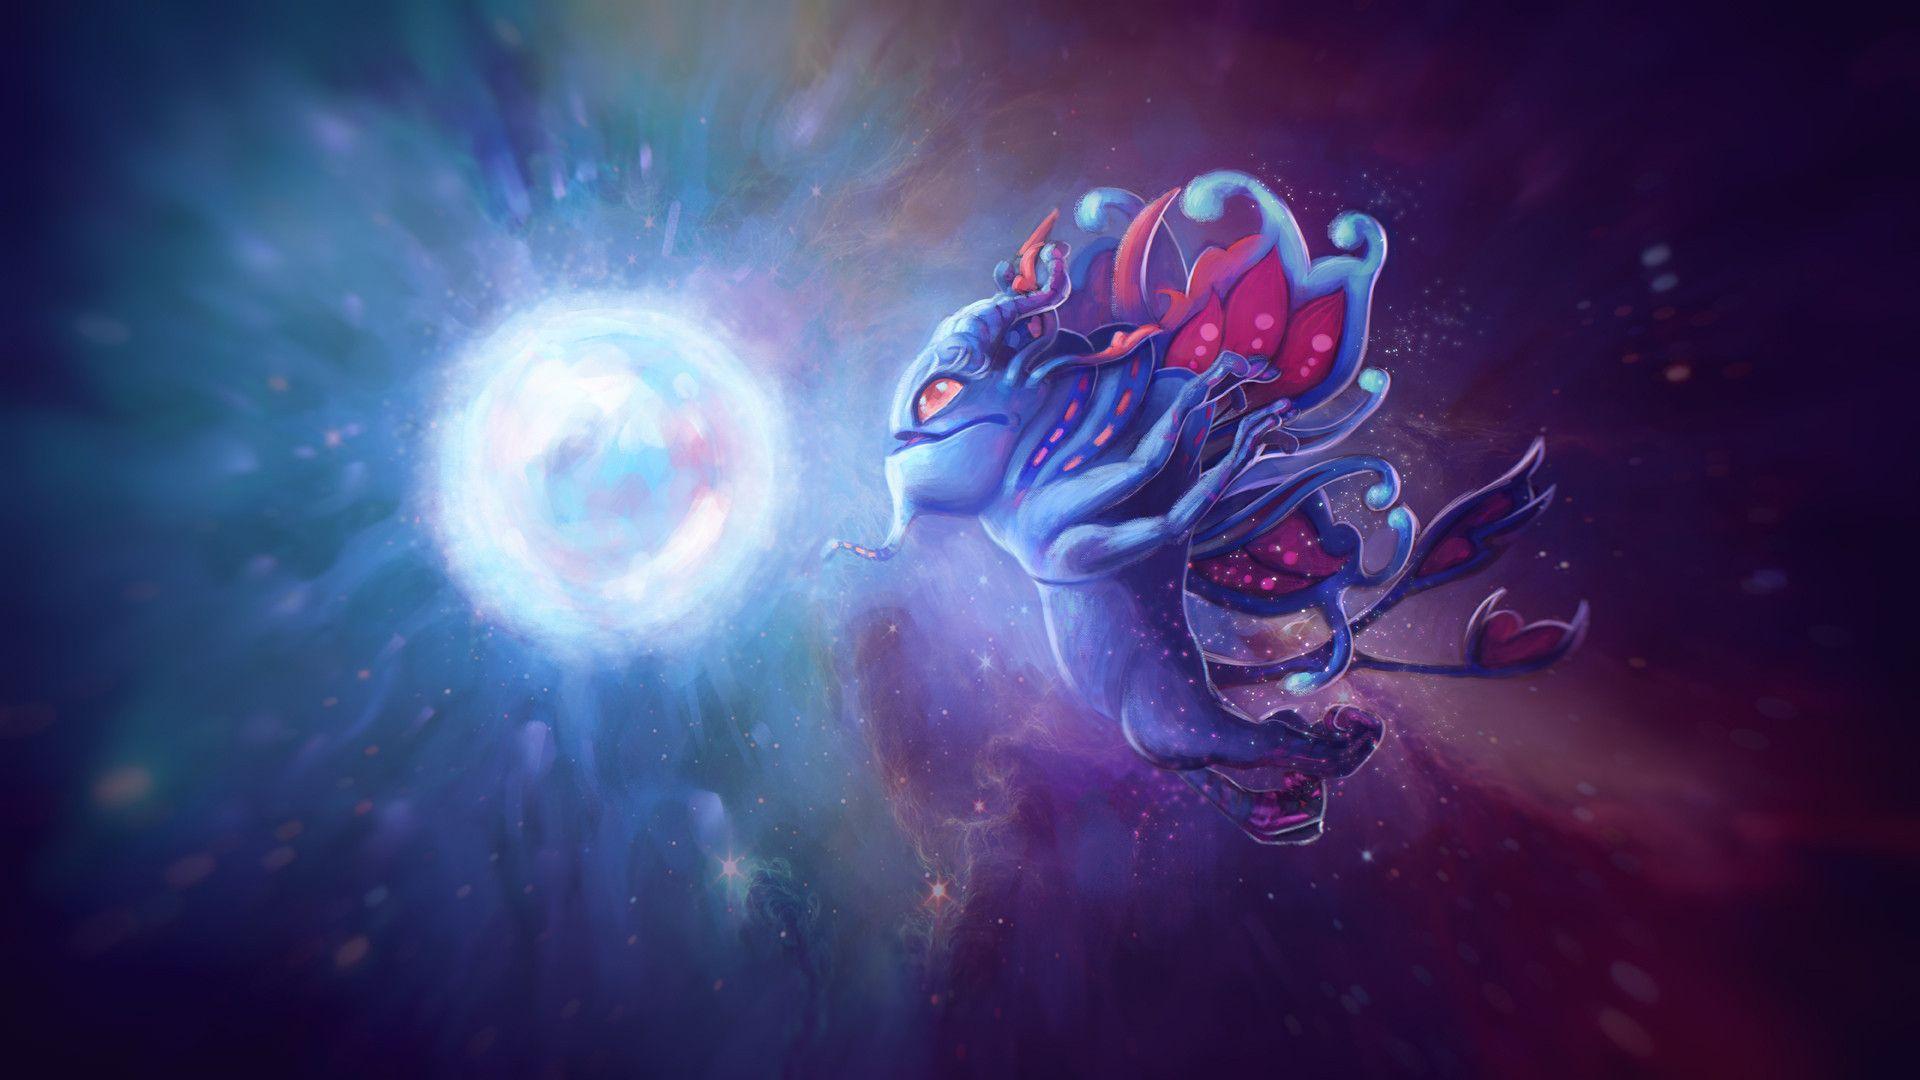 Puck Dota 2 H5 Wallpapers Hd Anon Forge